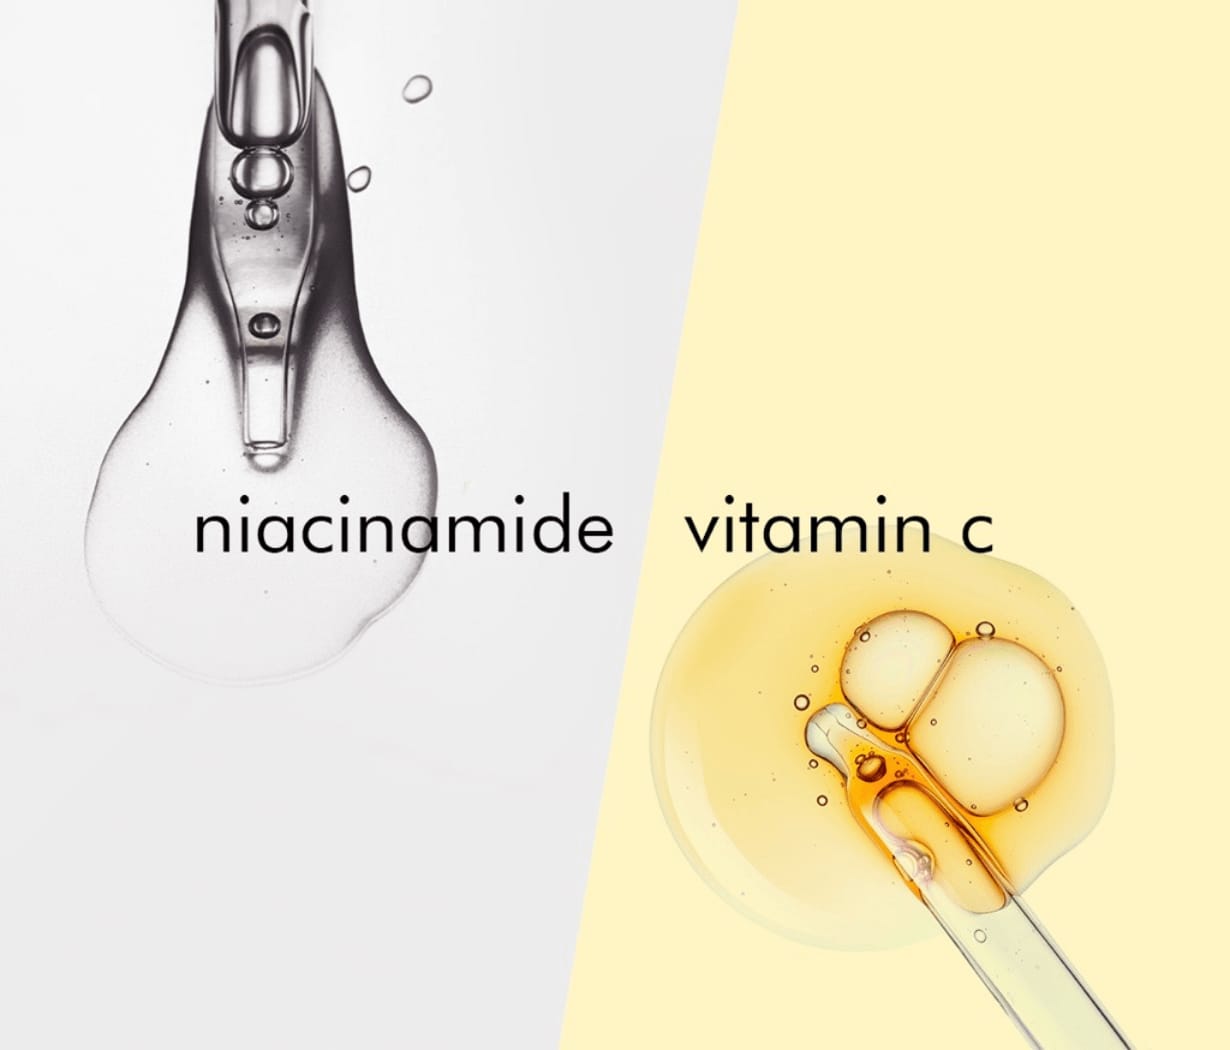 Can we pair up niacinamide with vitamin C?